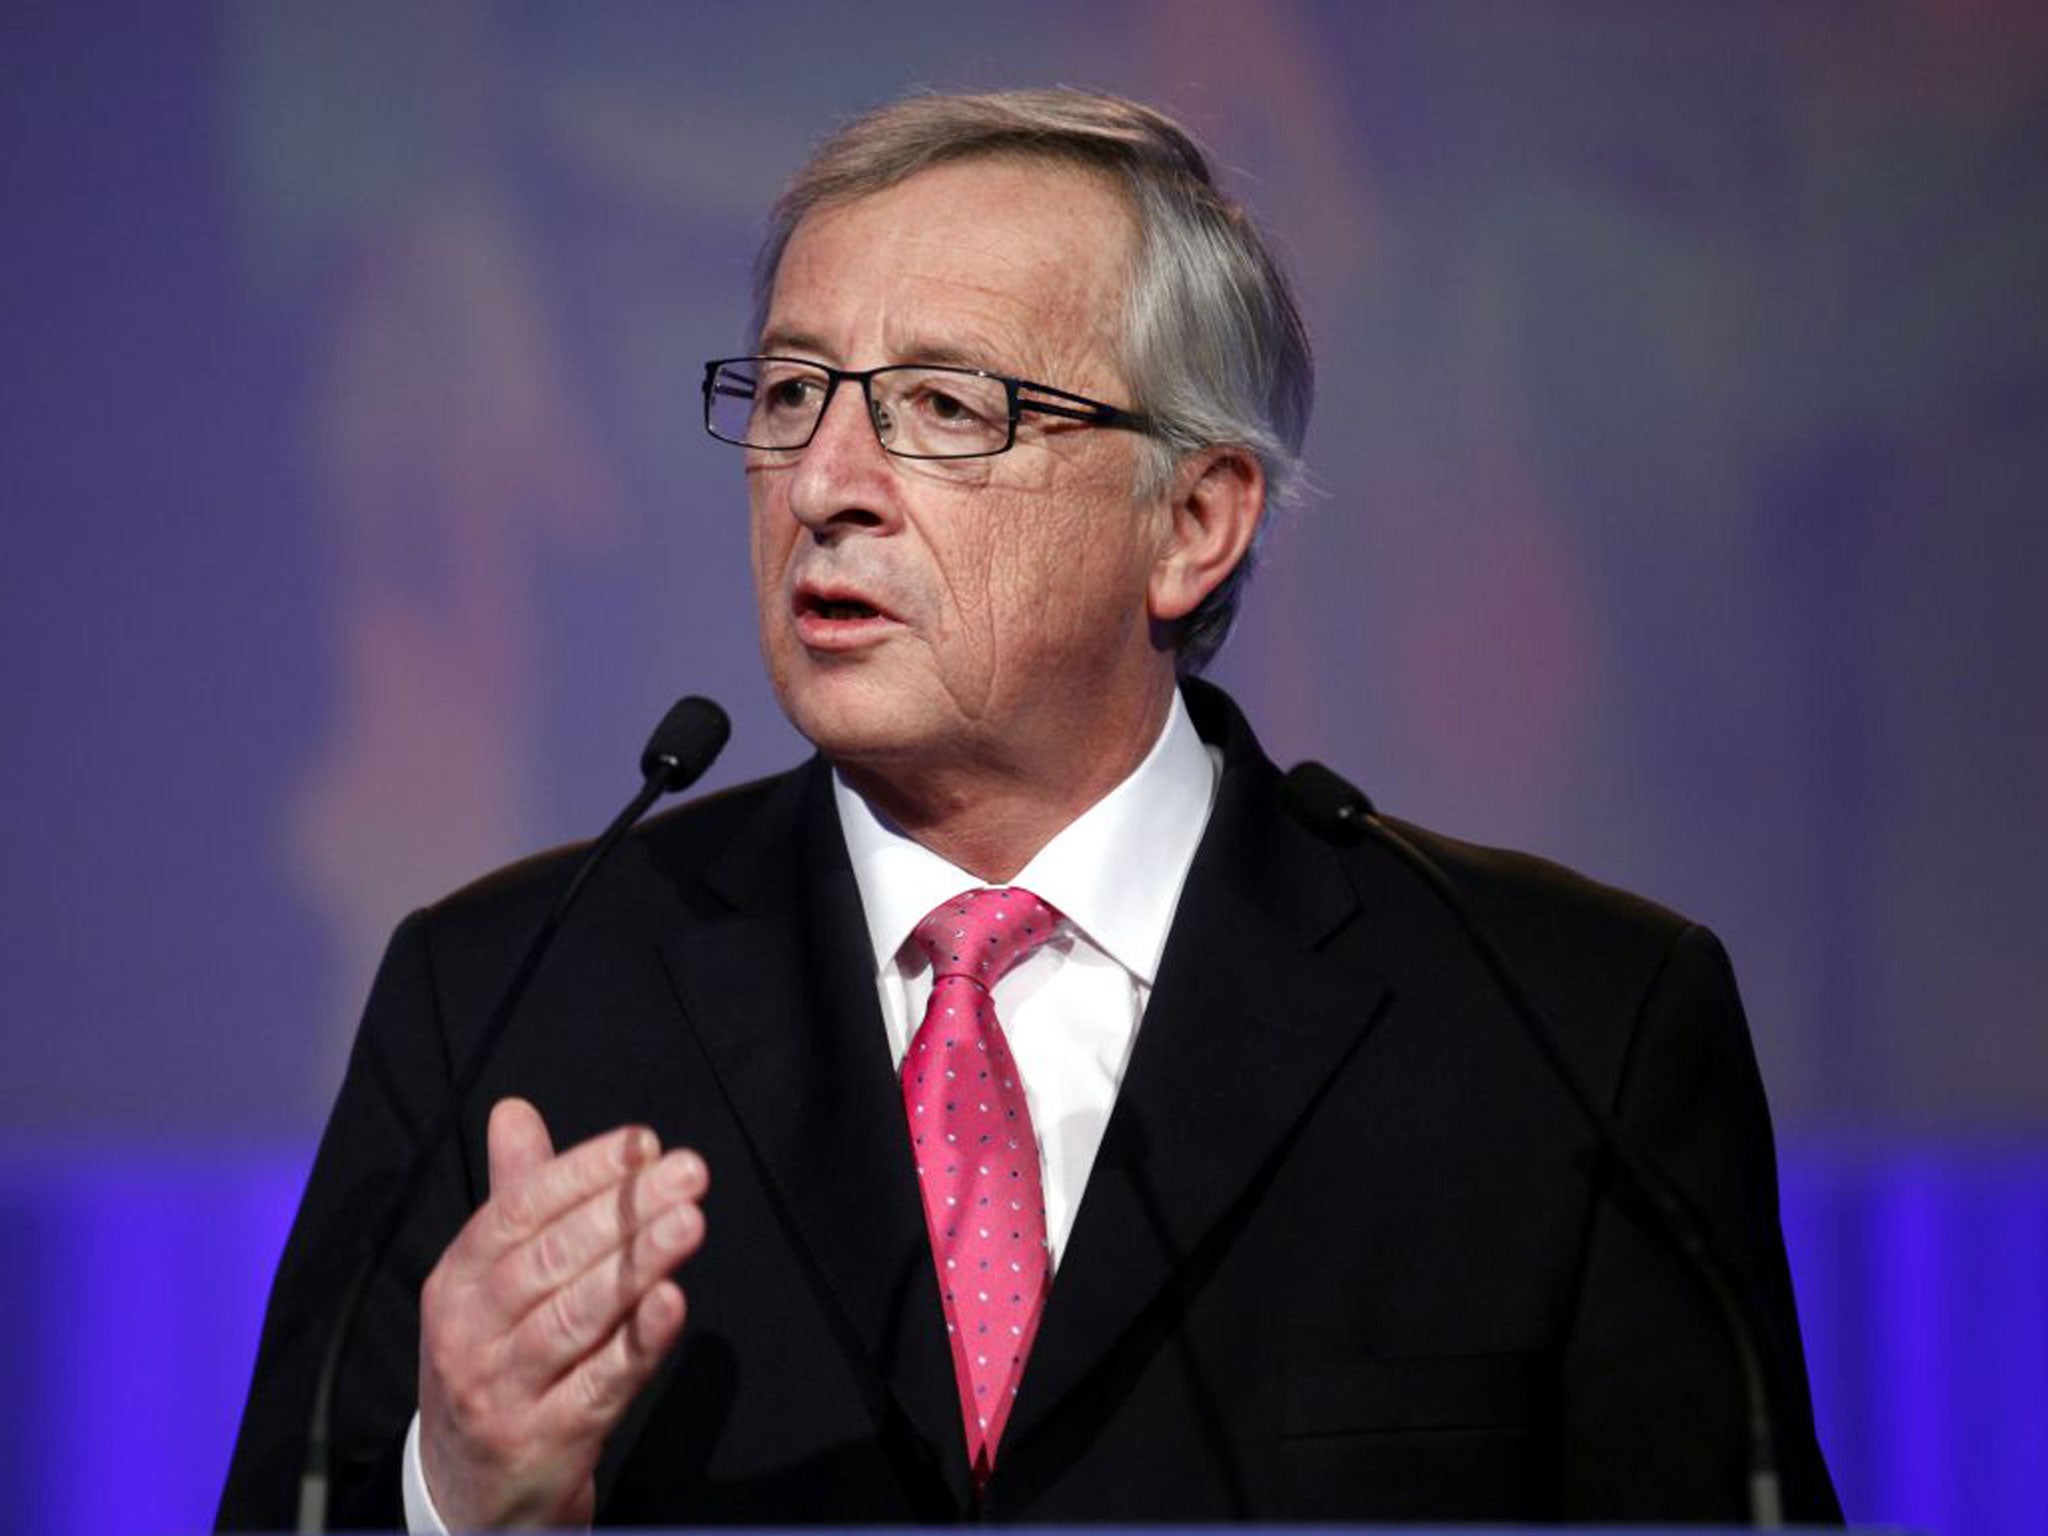 Jean-Claude Juncker was selected in a conference in Dublin last week as the candidate of the EPP